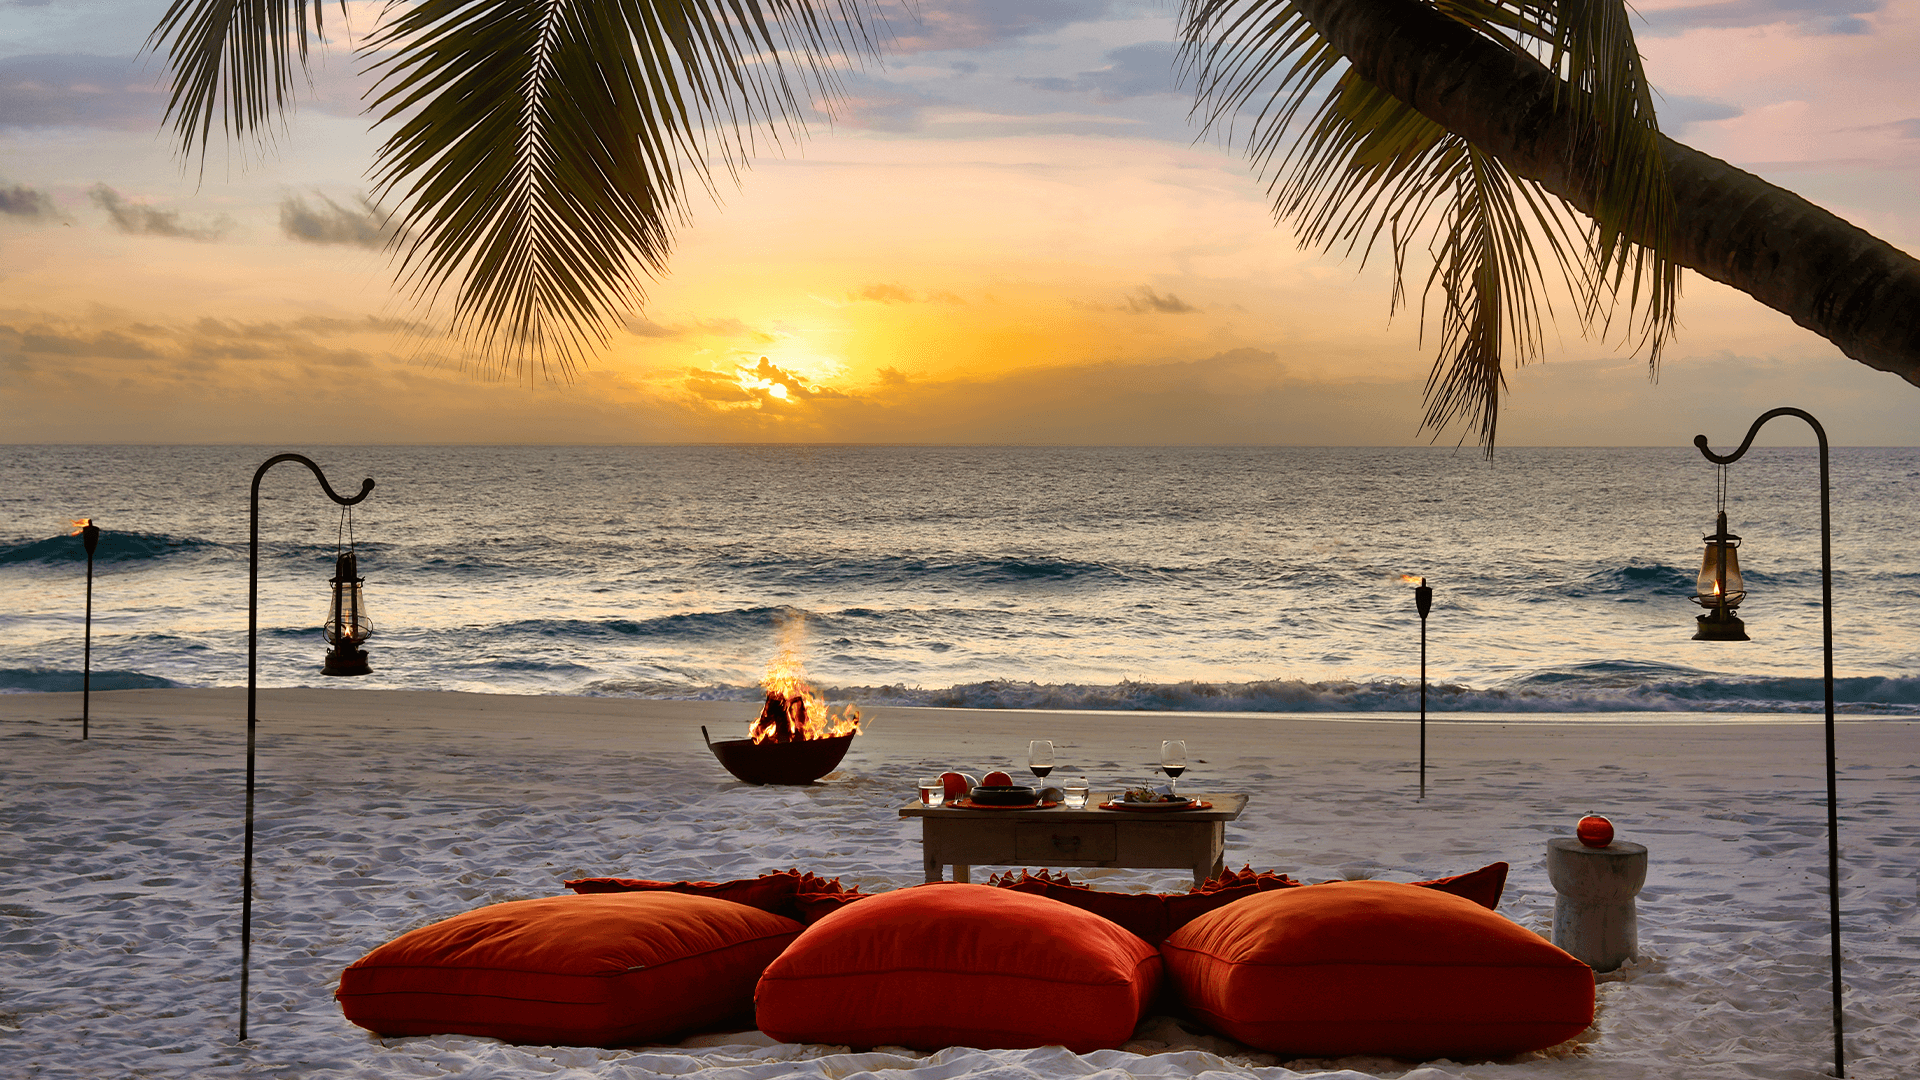 Picnic on a beach at sunset